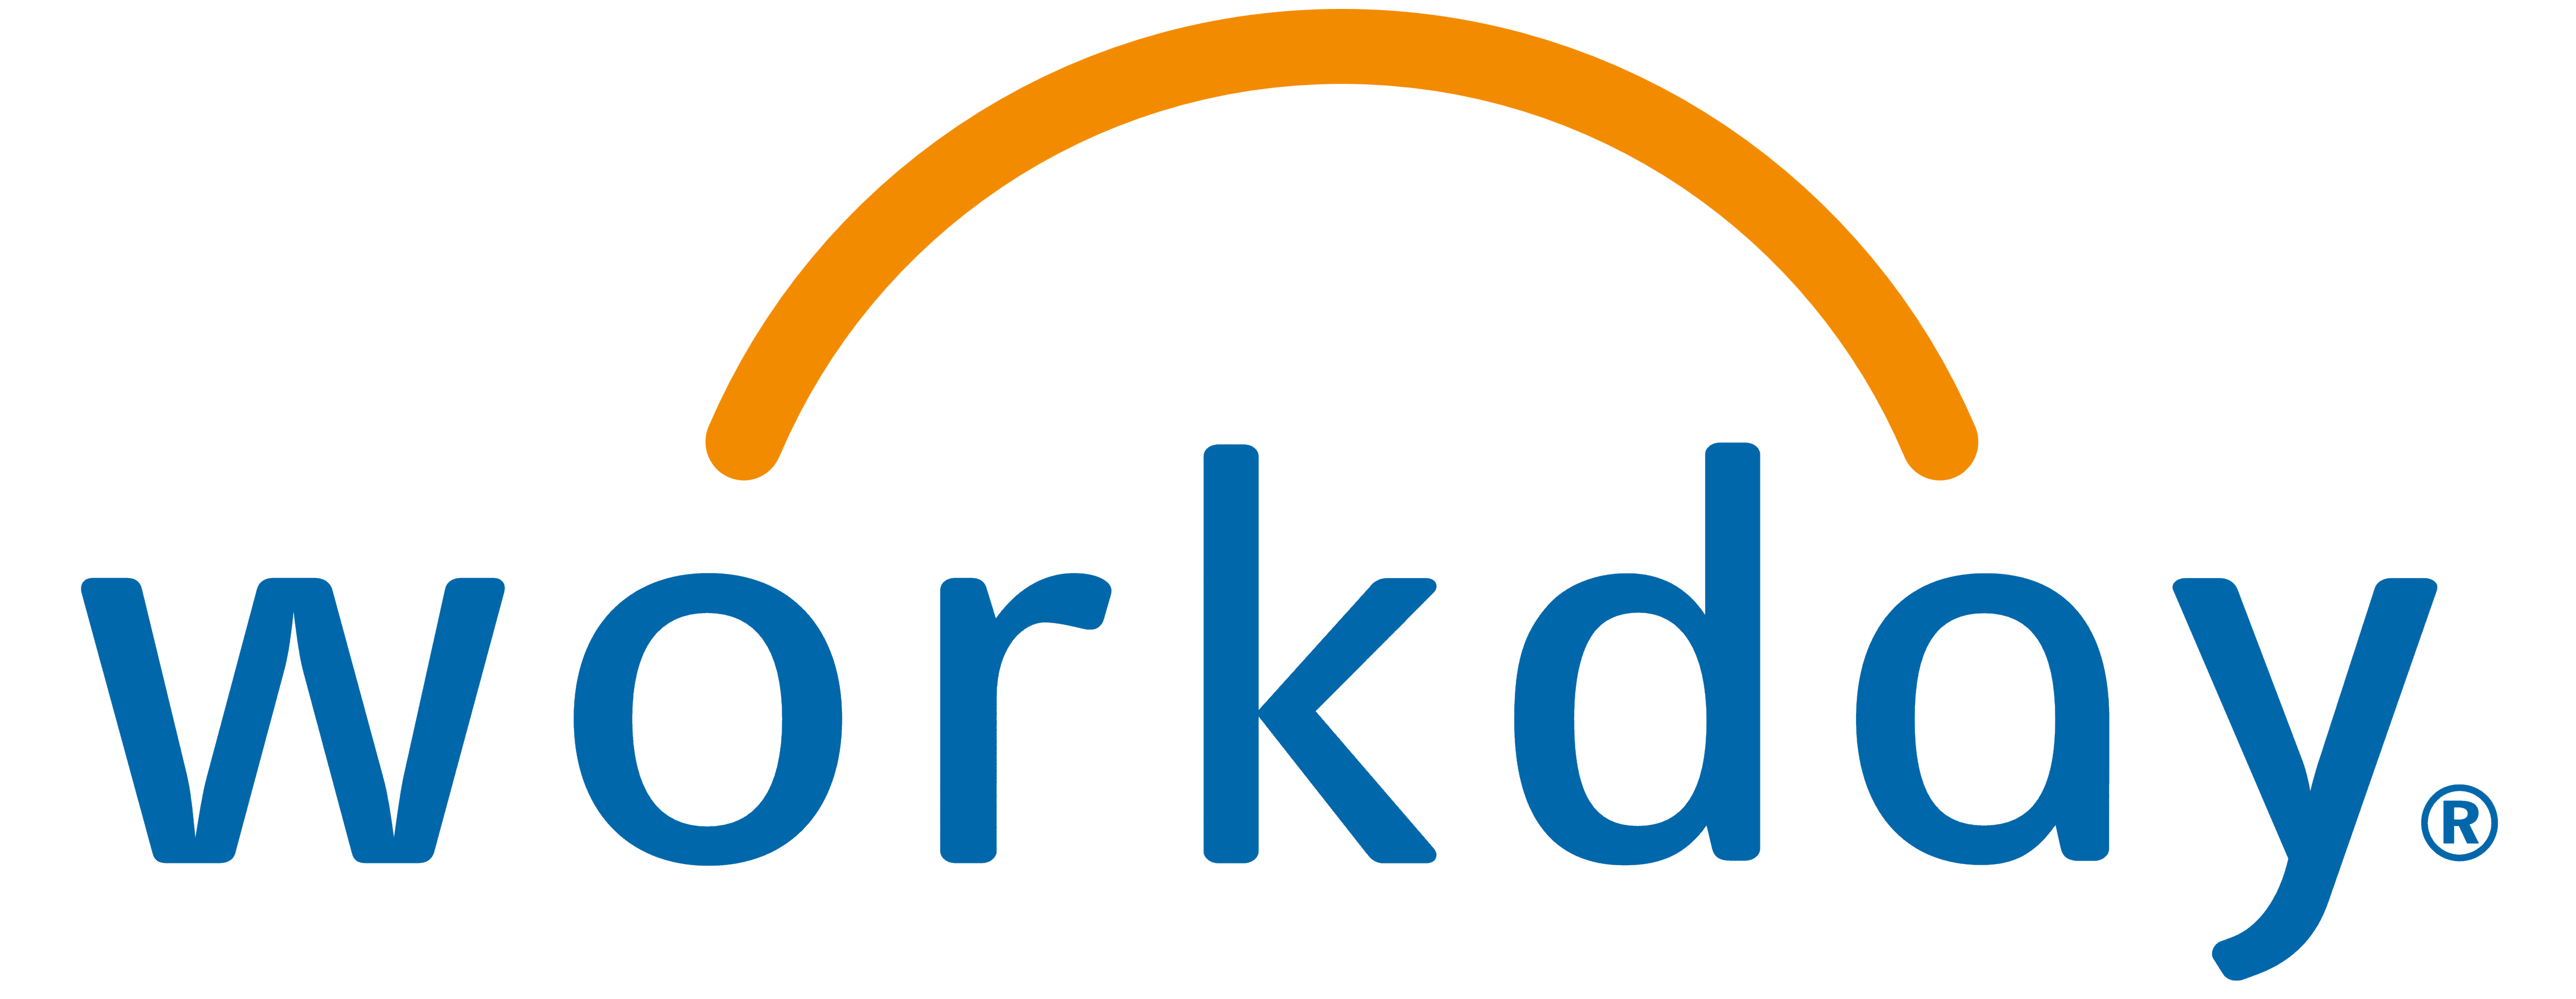 Clear logo for Workday